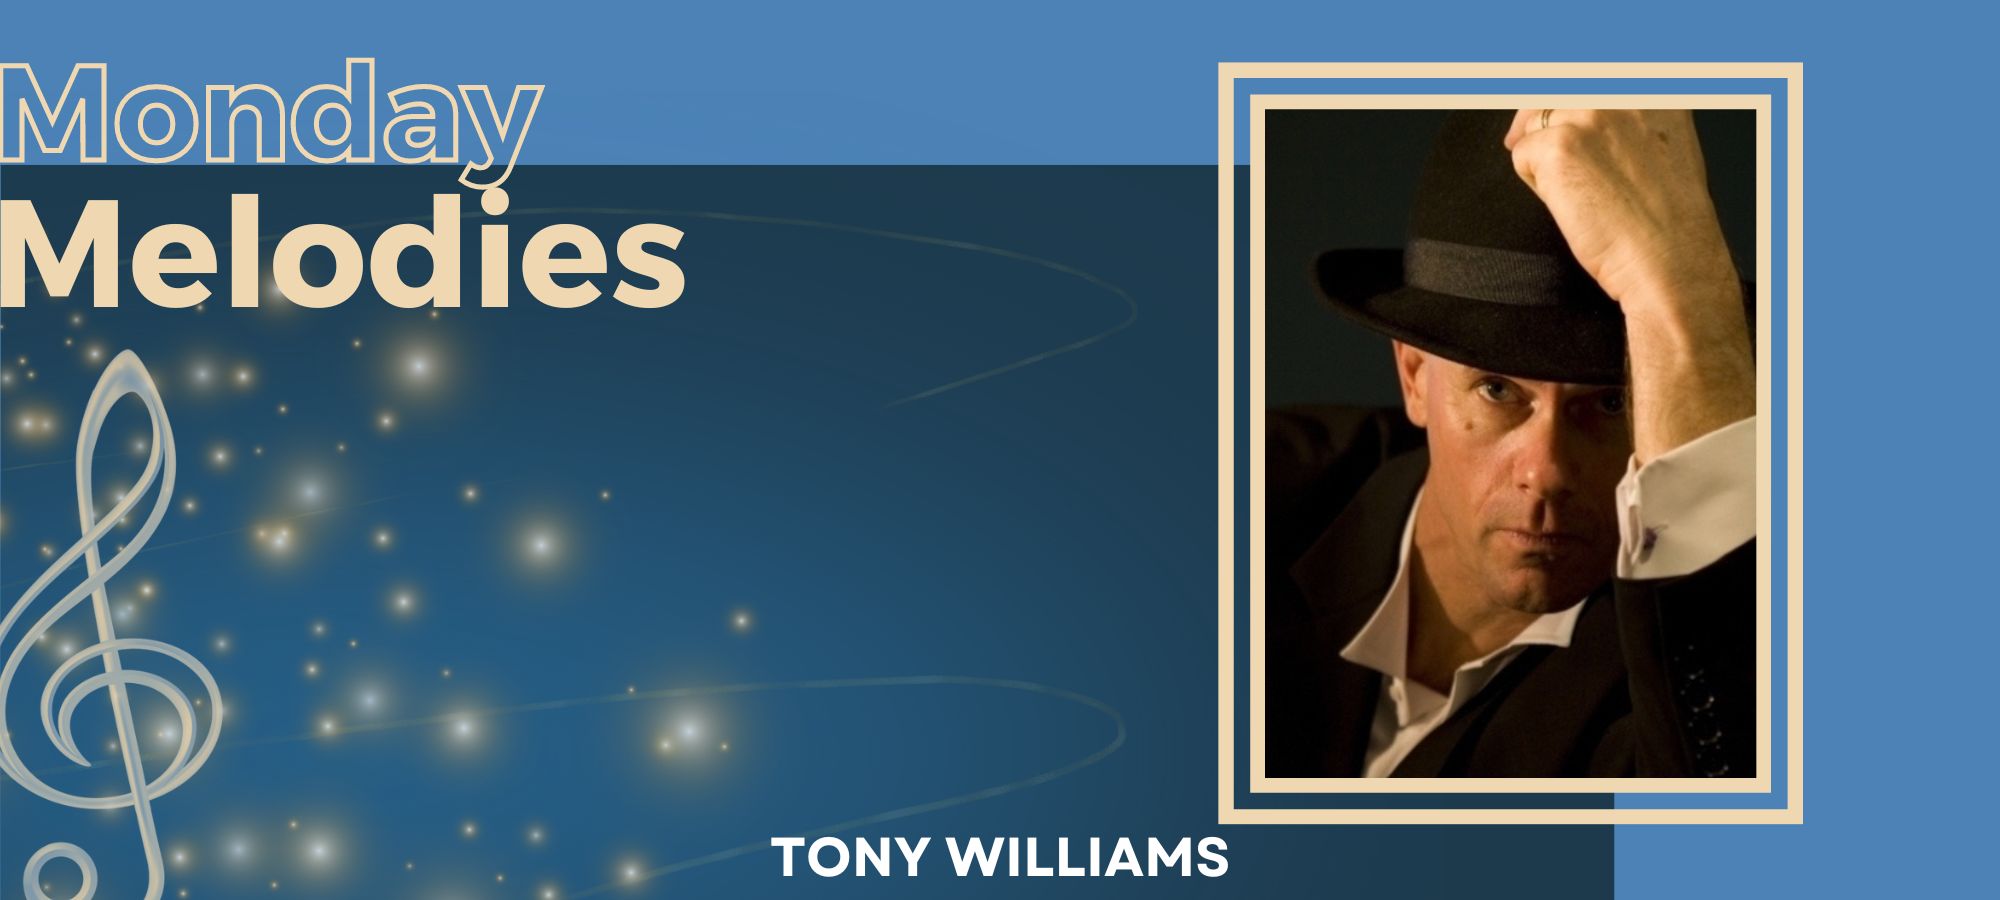 Monday Melodies with Tony Williams